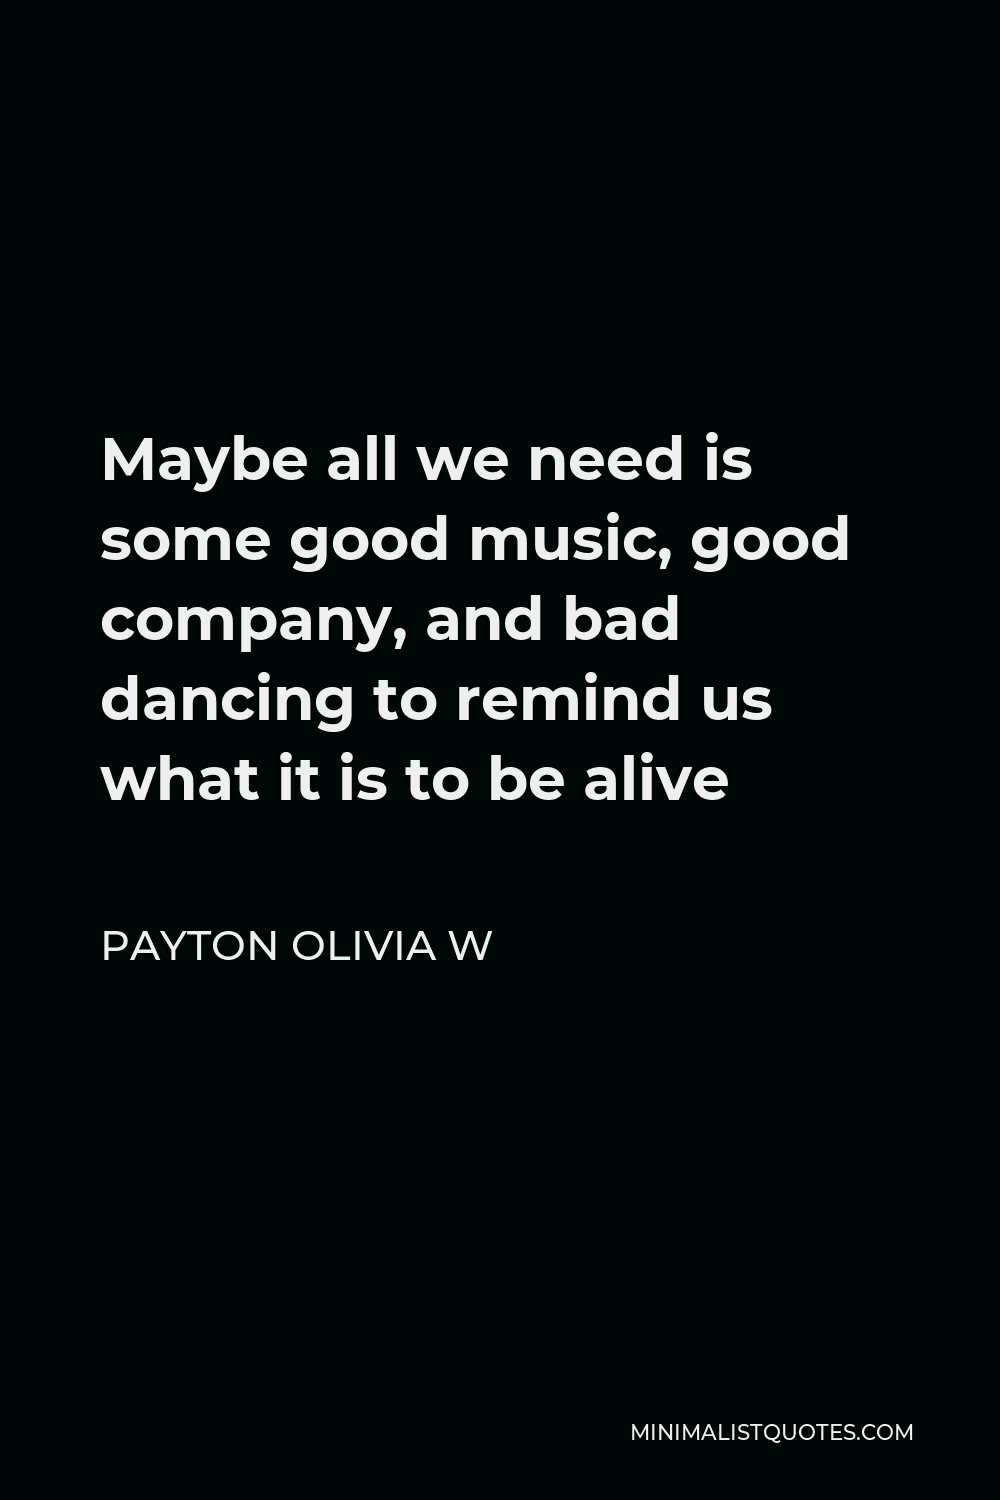 Payton Olivia W Quote - Maybe all we need is some good music, good company, and bad dancing to remind us what it is to be alive